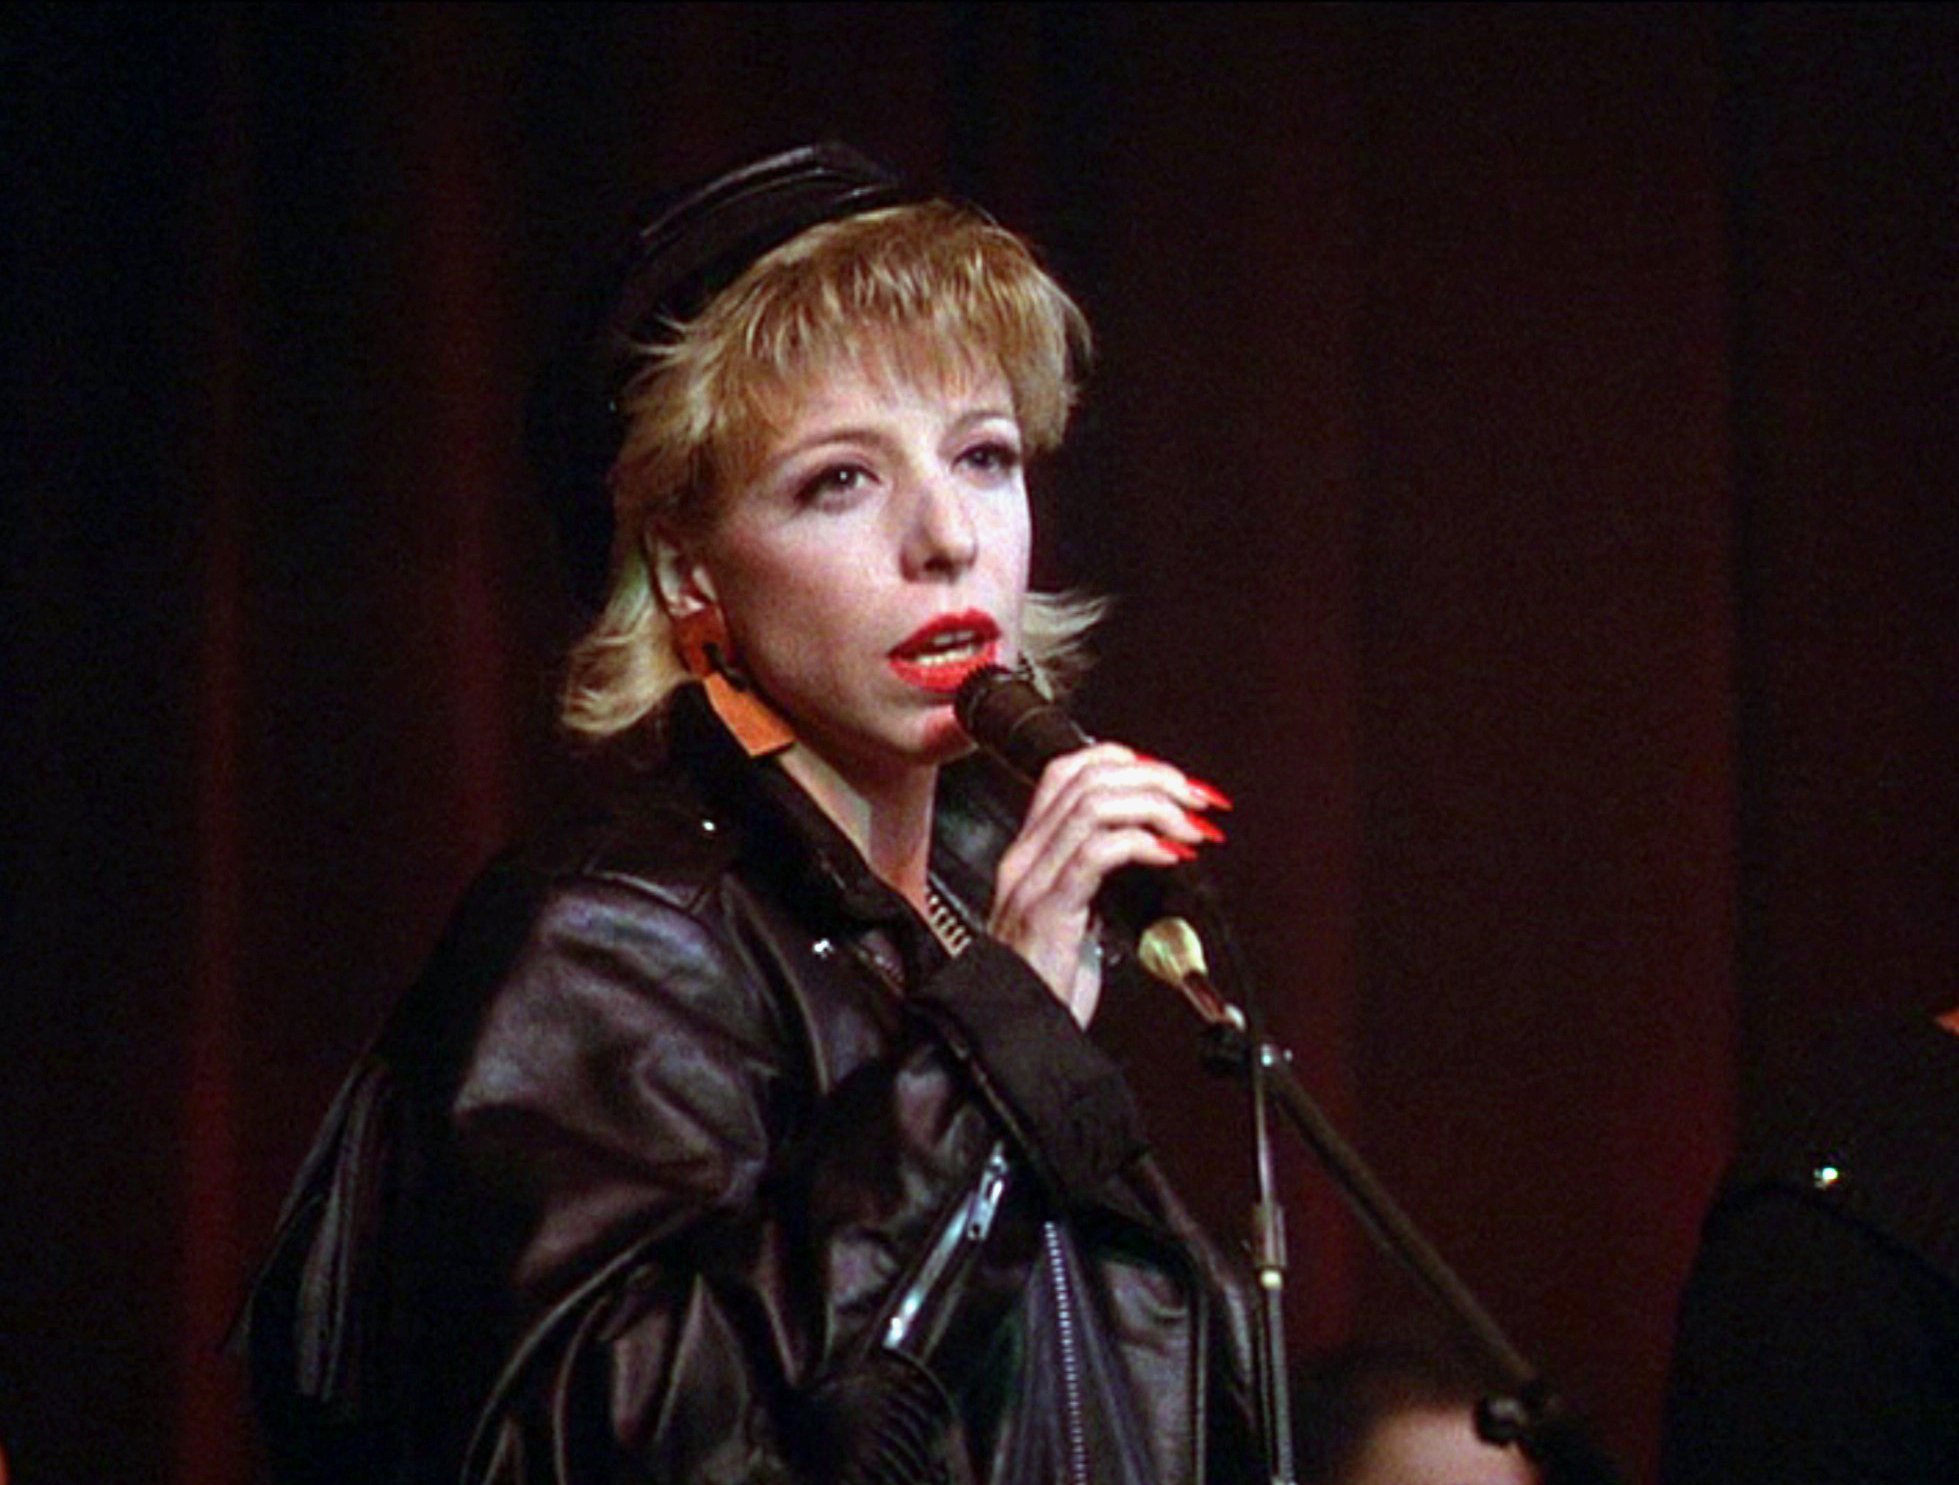 Julee Cruise singing on "Twin Peaks" on April 8, 1990 | Source: Getty Images